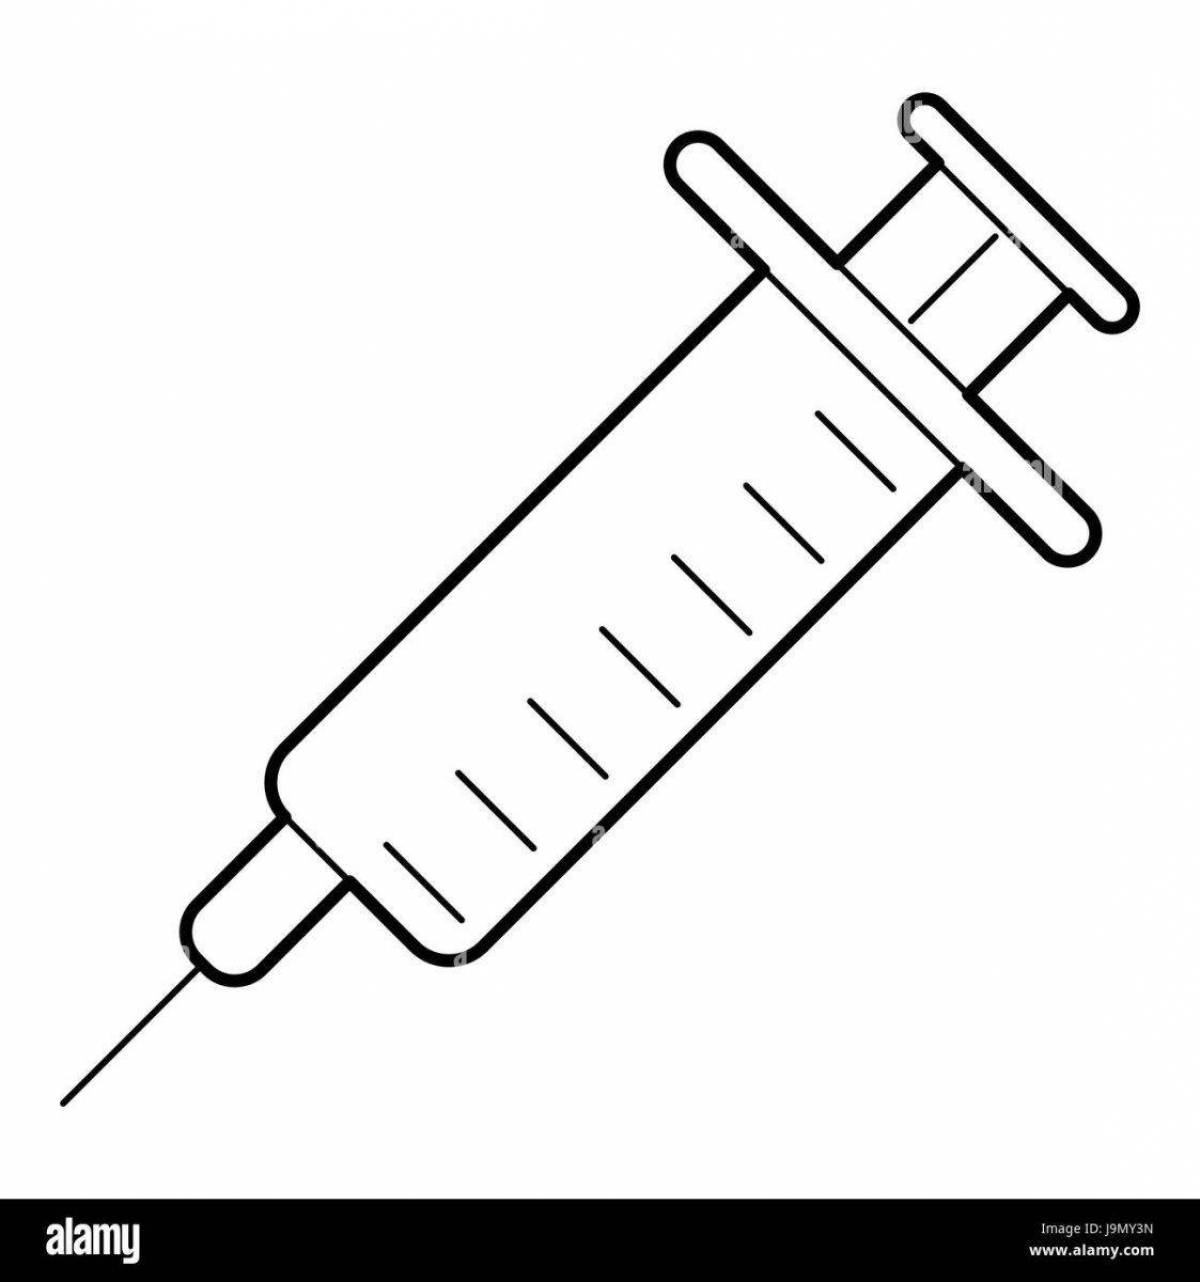 Attractive syringe coloring page